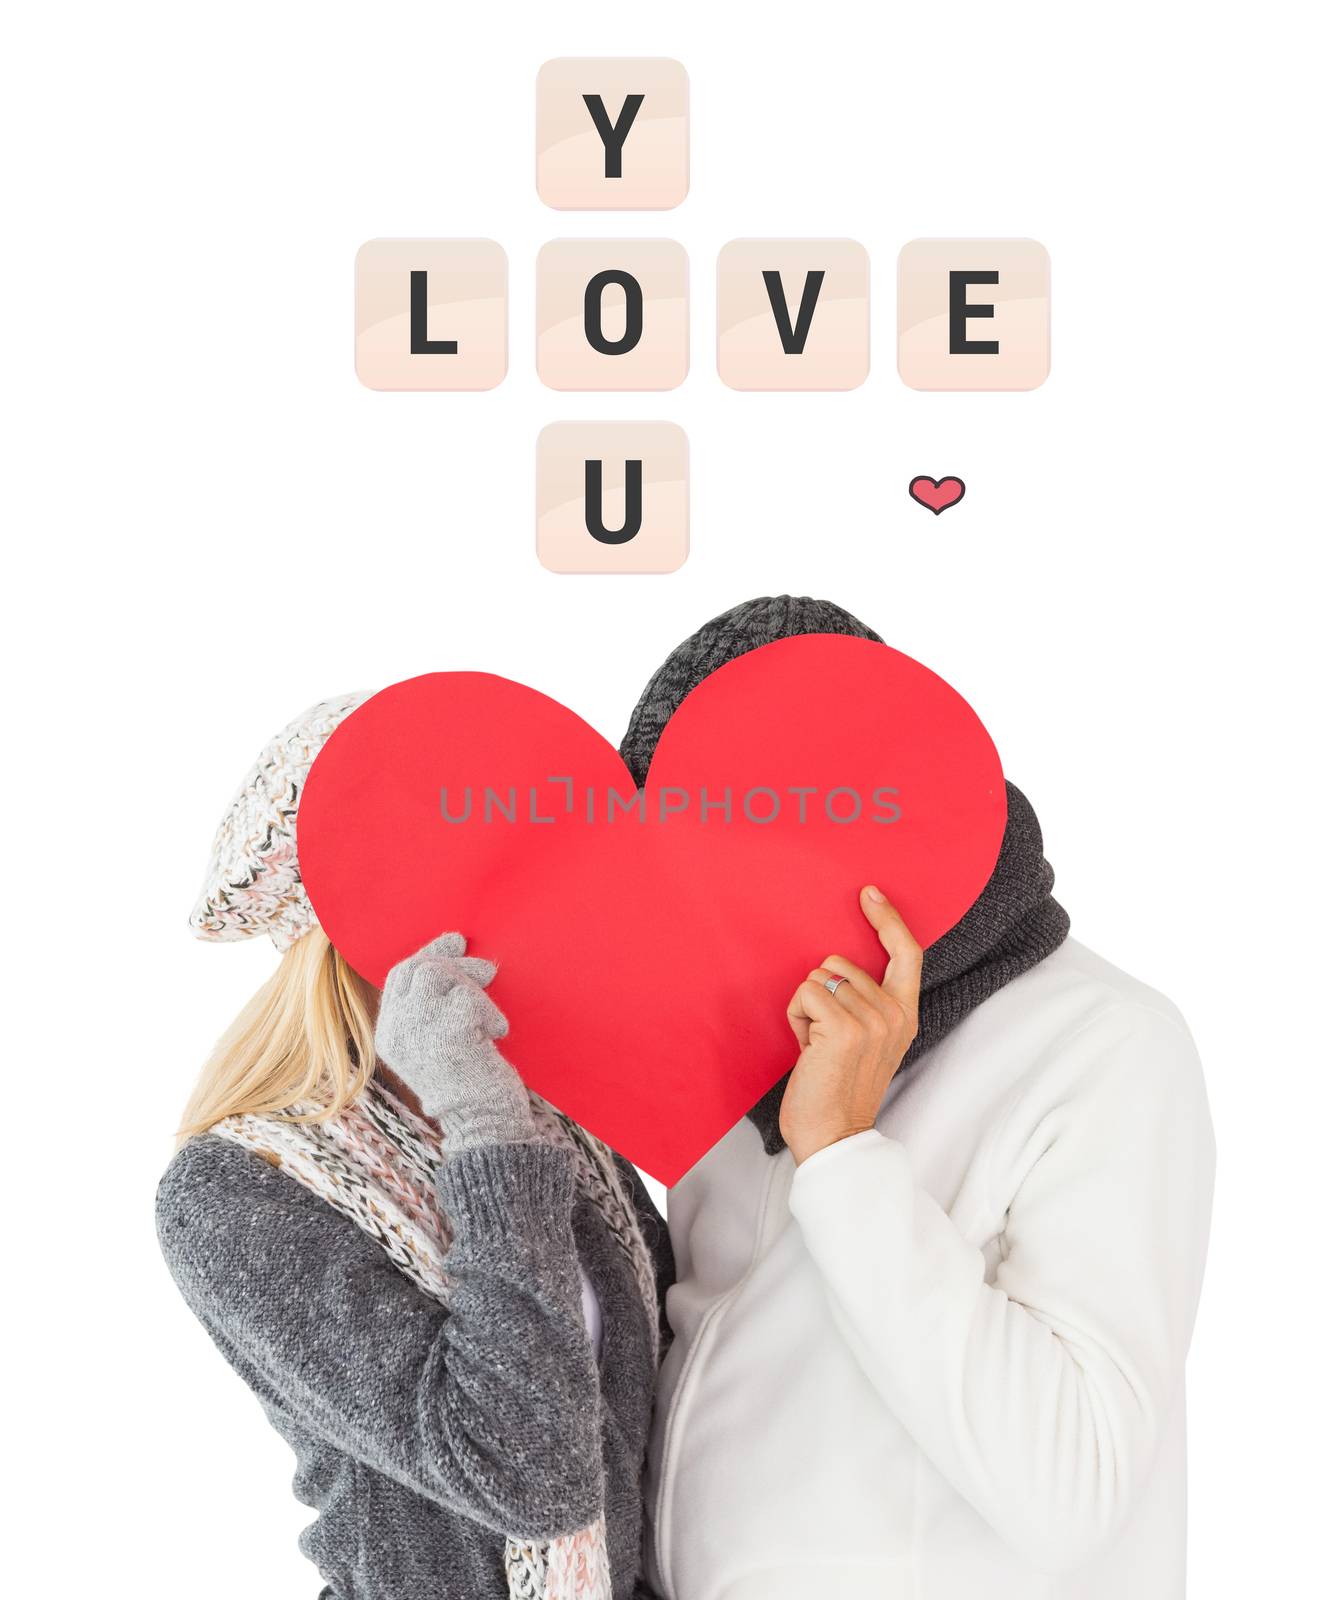 Couple in winter fashion posing with heart shape against love you tiles